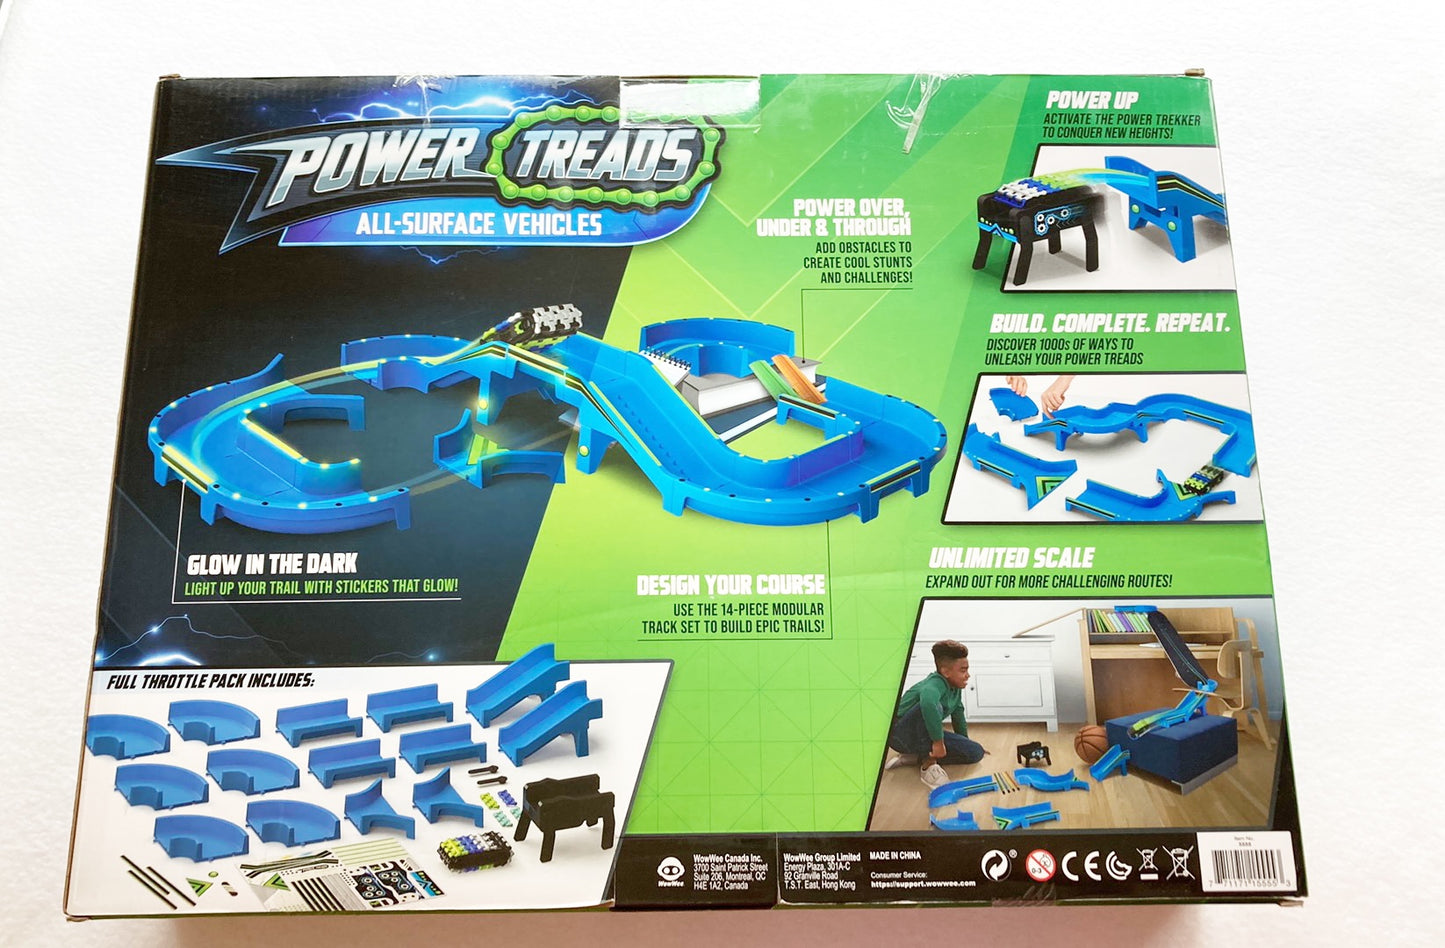 Power Treads All Surface Vehicle with Track-Glow in the Dark-Pickup possible in West Chester, Norwood, Blue Ash, or Reading outside of bi-annual sales event pickup.